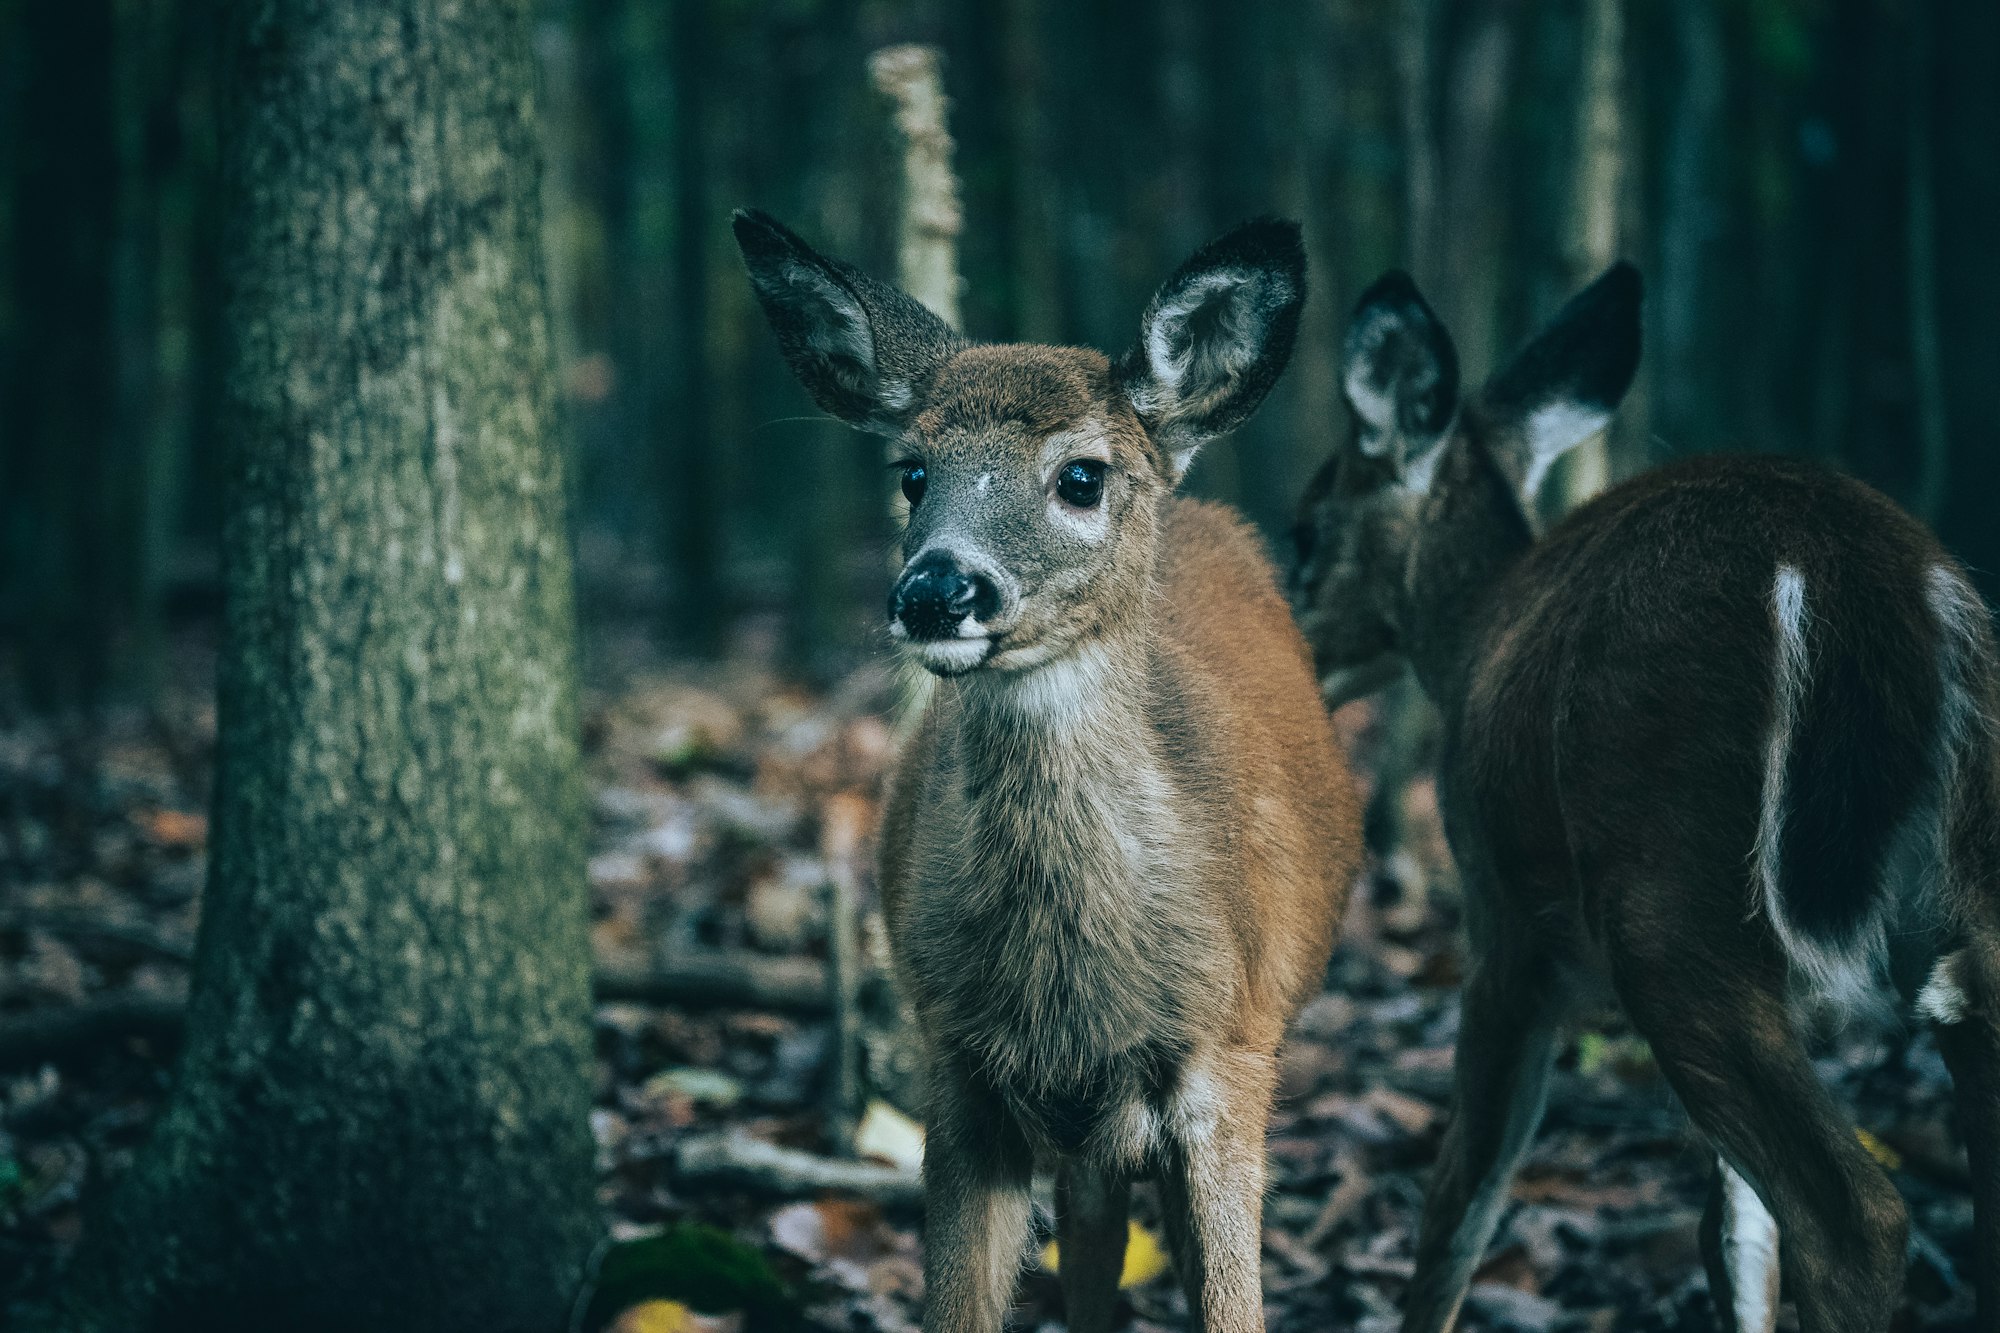 Another rabid animal confirmed in Sussex — this time a deer